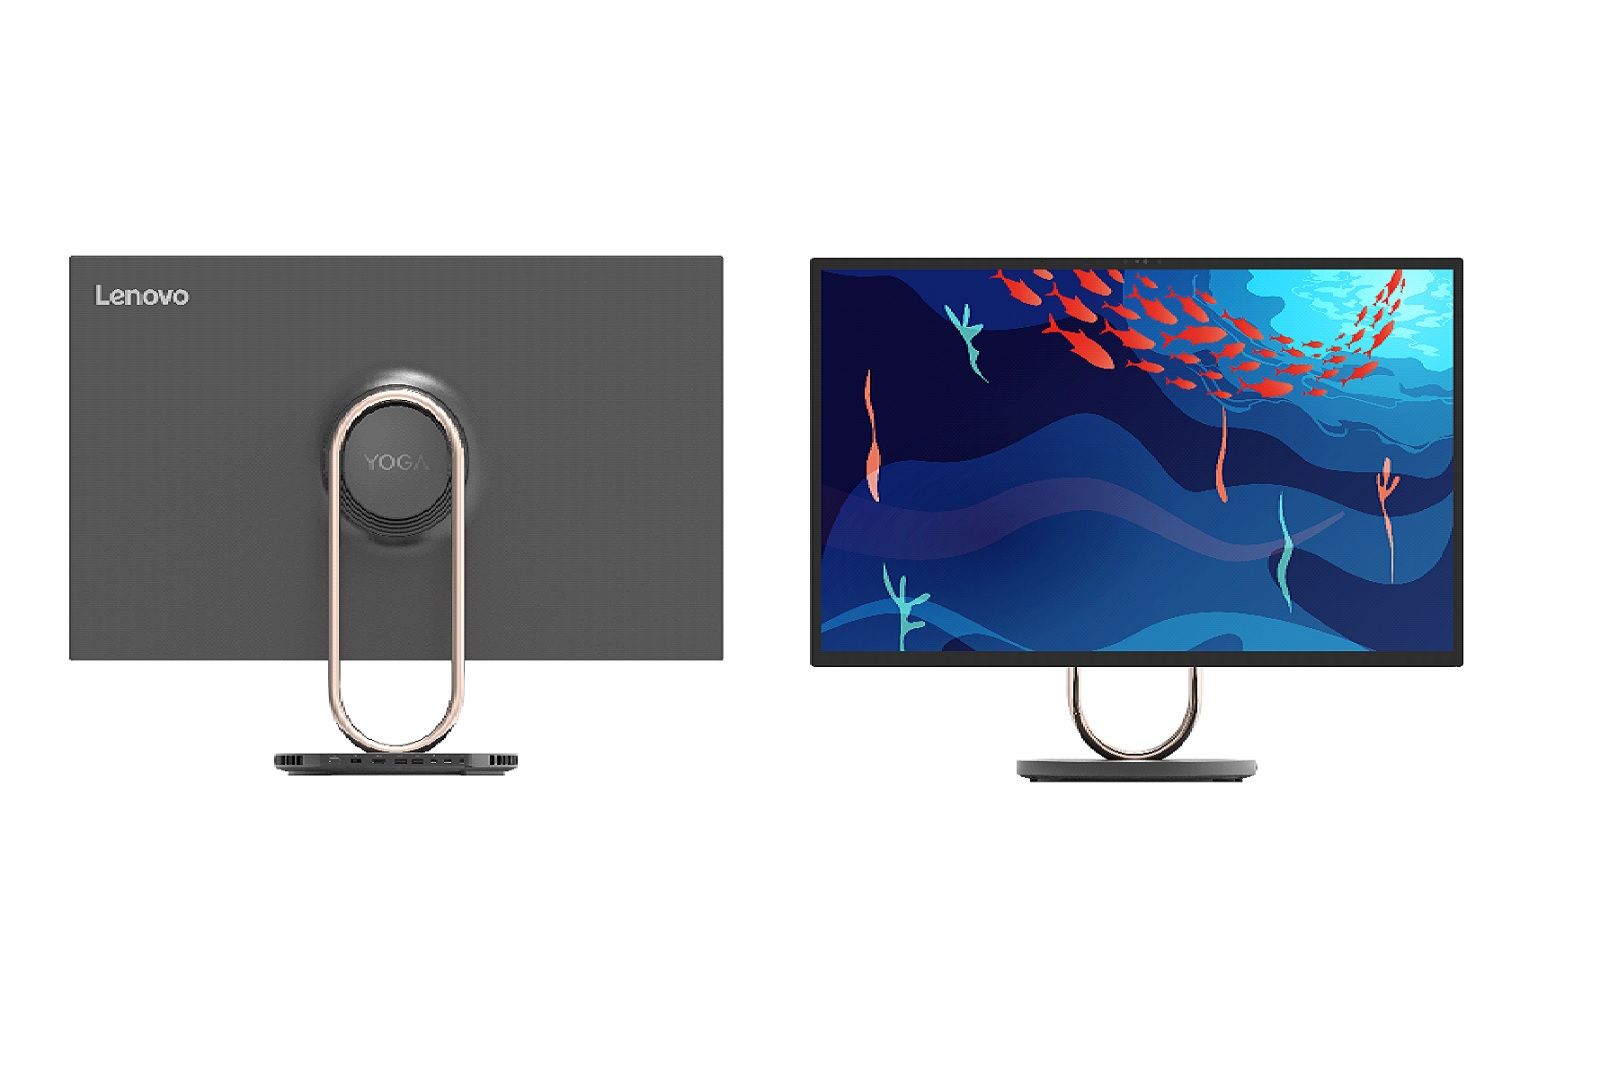 Lenovo's Yoga AIO 9i all-in-one desktop is a marvel of engineering